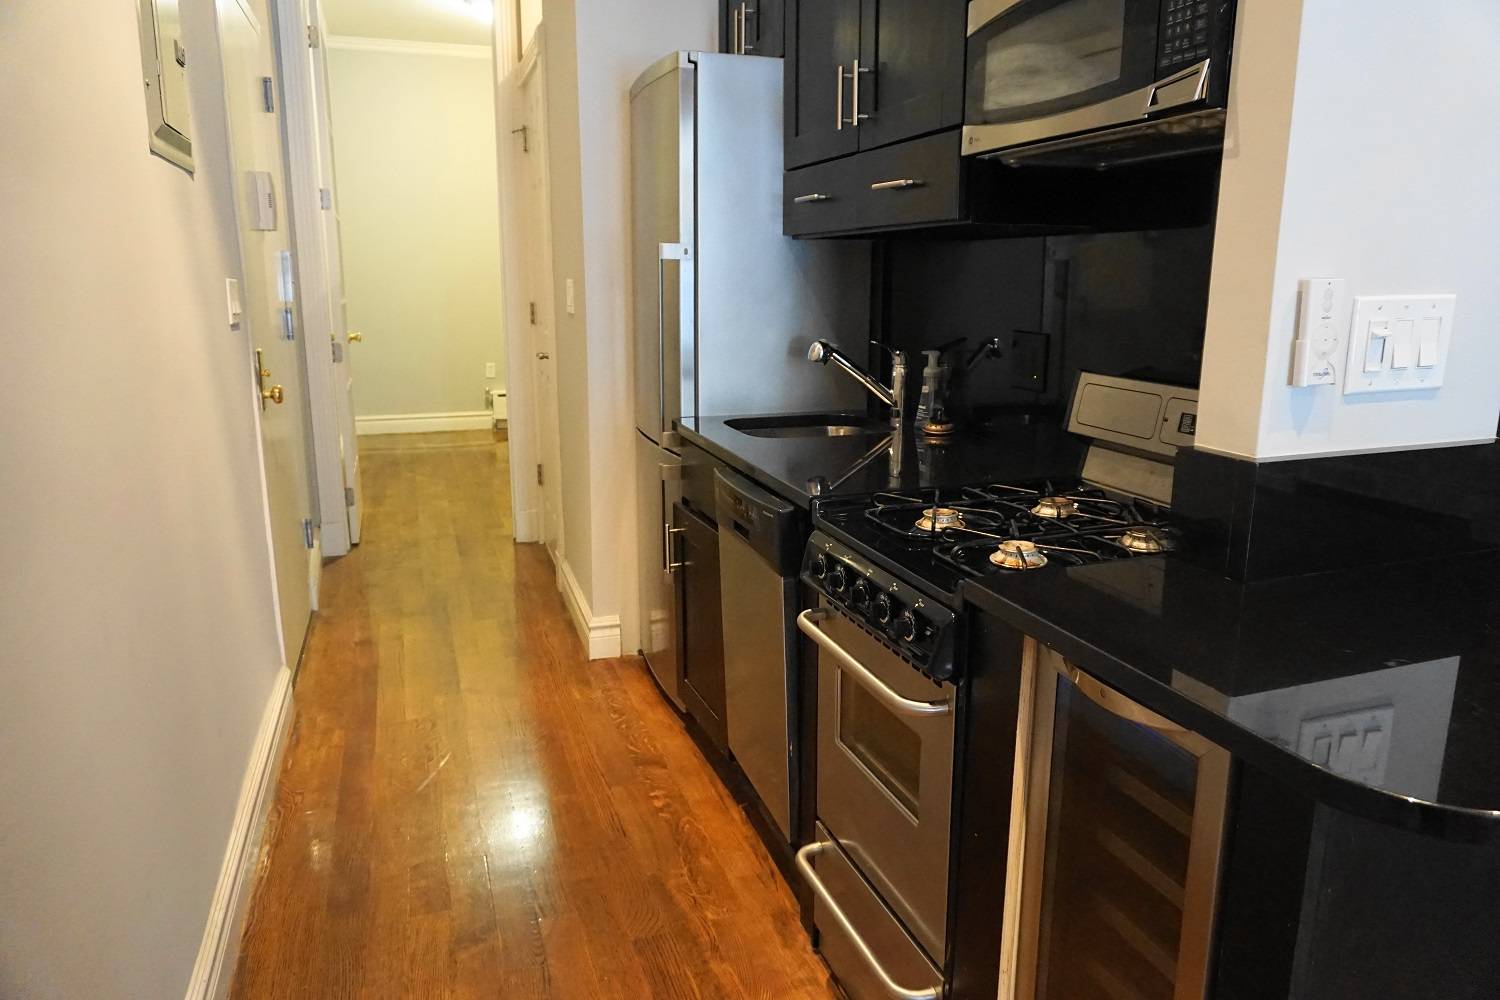 No Fee - Large and Luxurious 3 Bedroom Duplex in the Heart of West Village